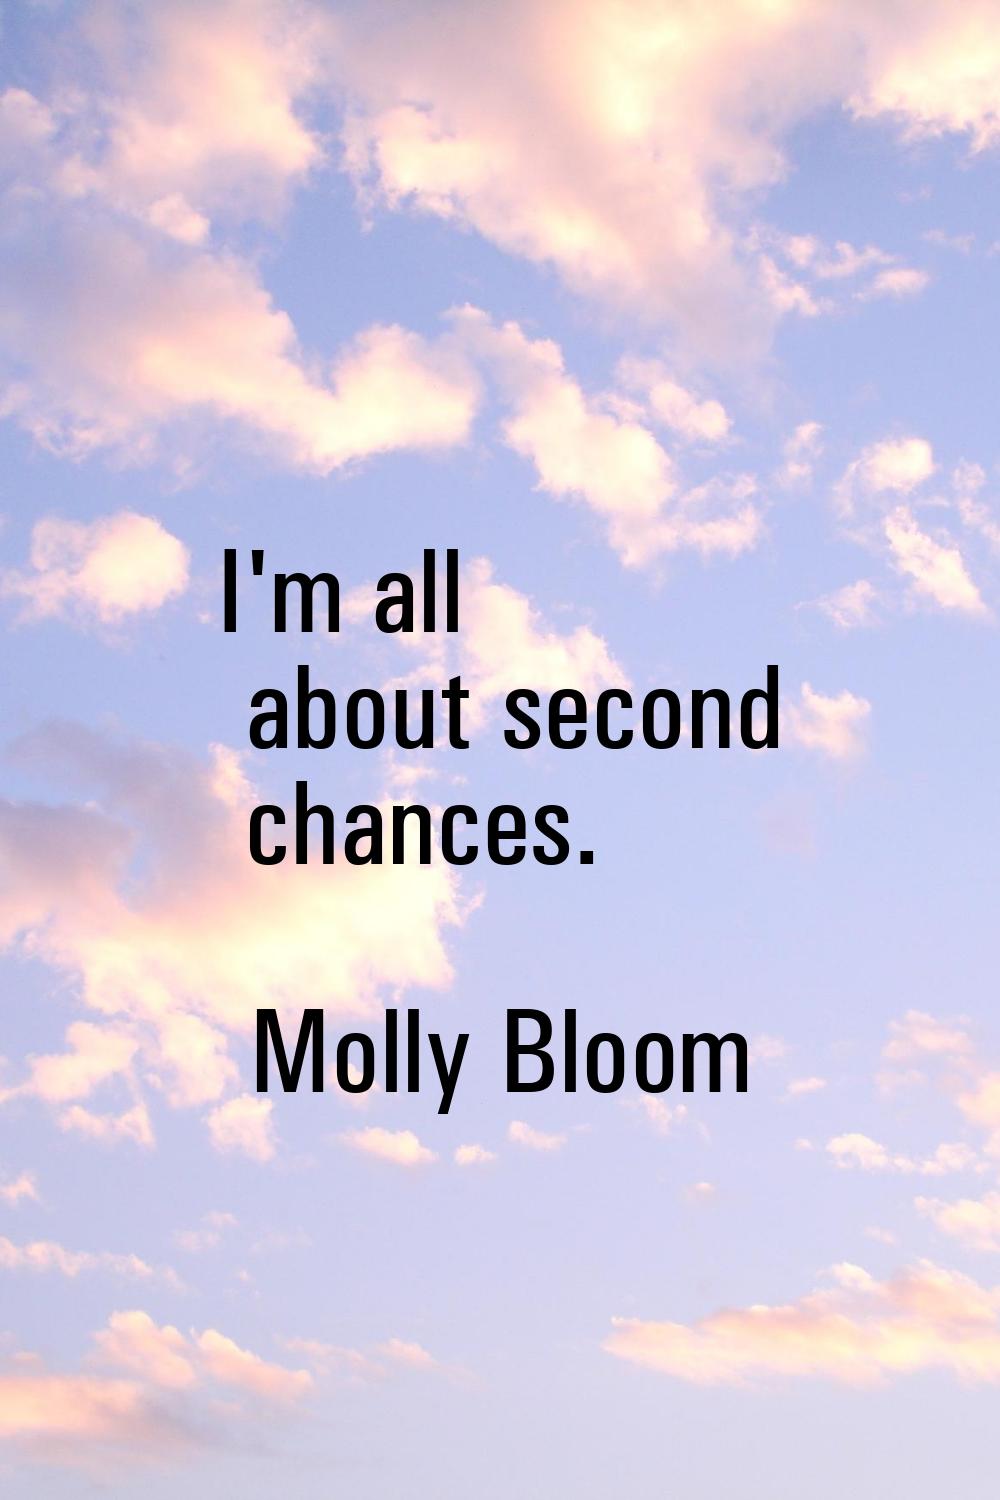 I'm all about second chances.